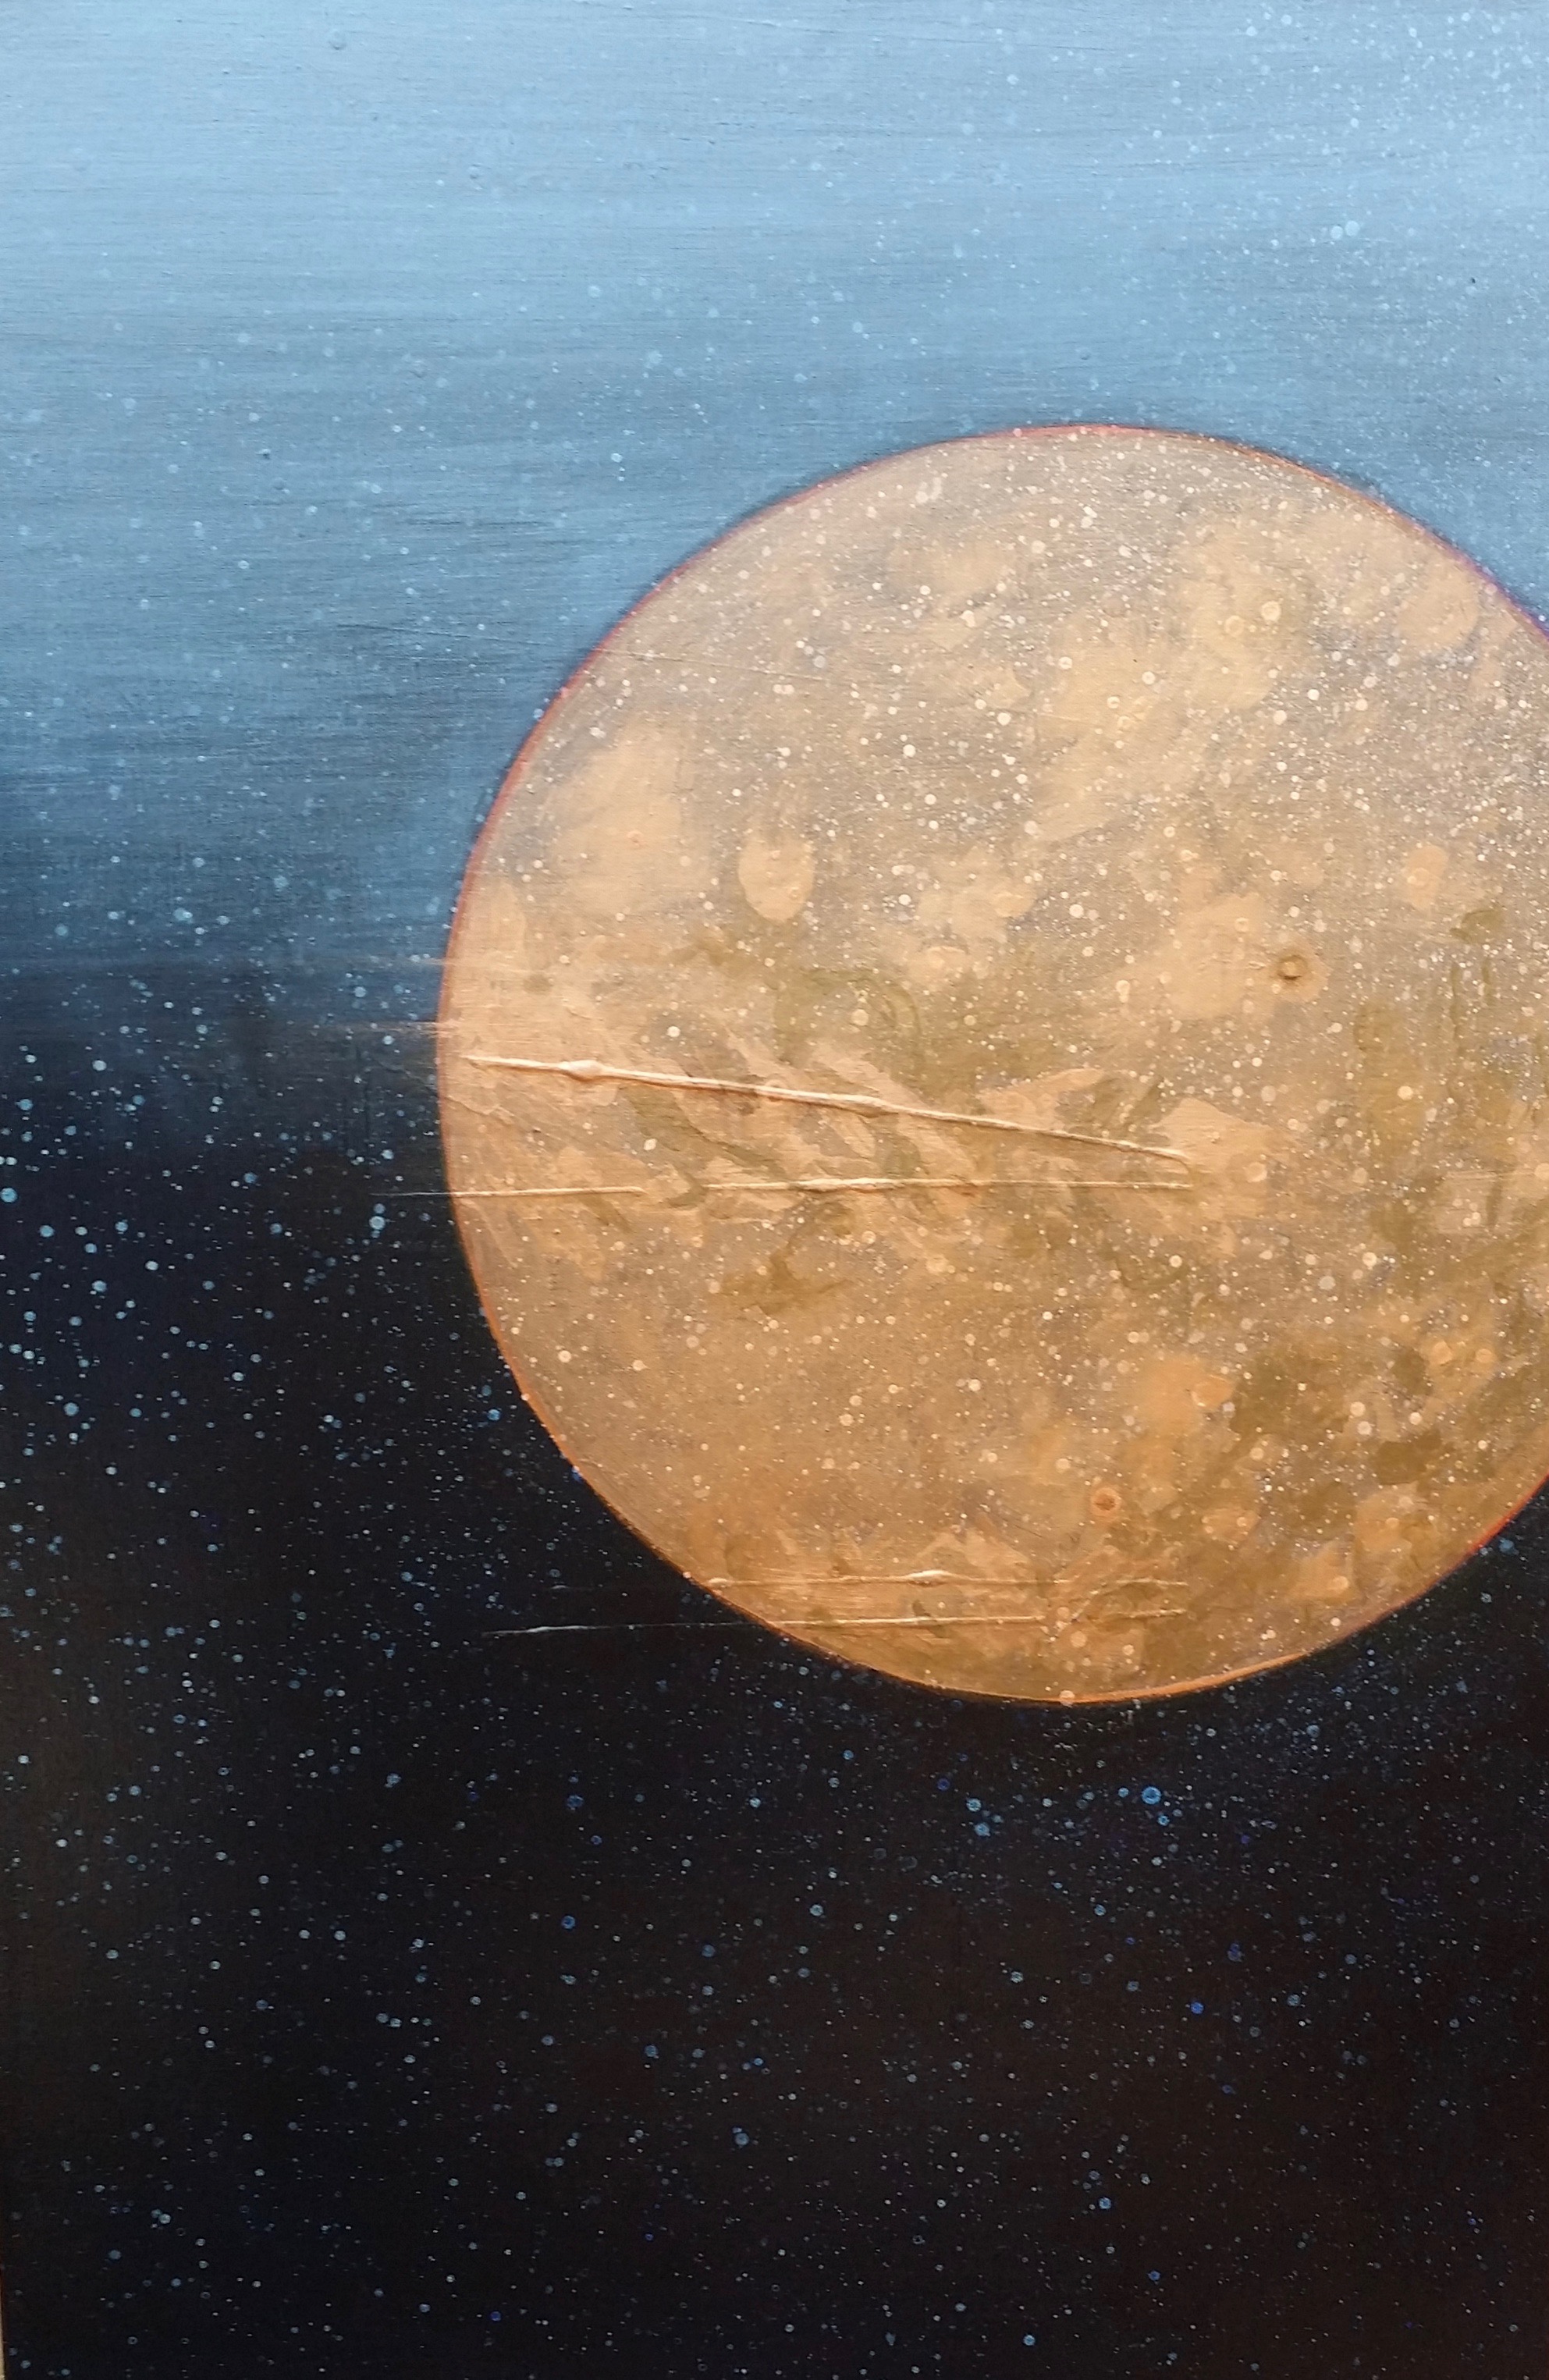  Mars, 2018 36 x 24 inches Acrylic on canvas   February 18, 2021 Perseverance rover landed on Mars to explore Jezero crater. The goal of NASA's mission is to uncover a once-animate world. 